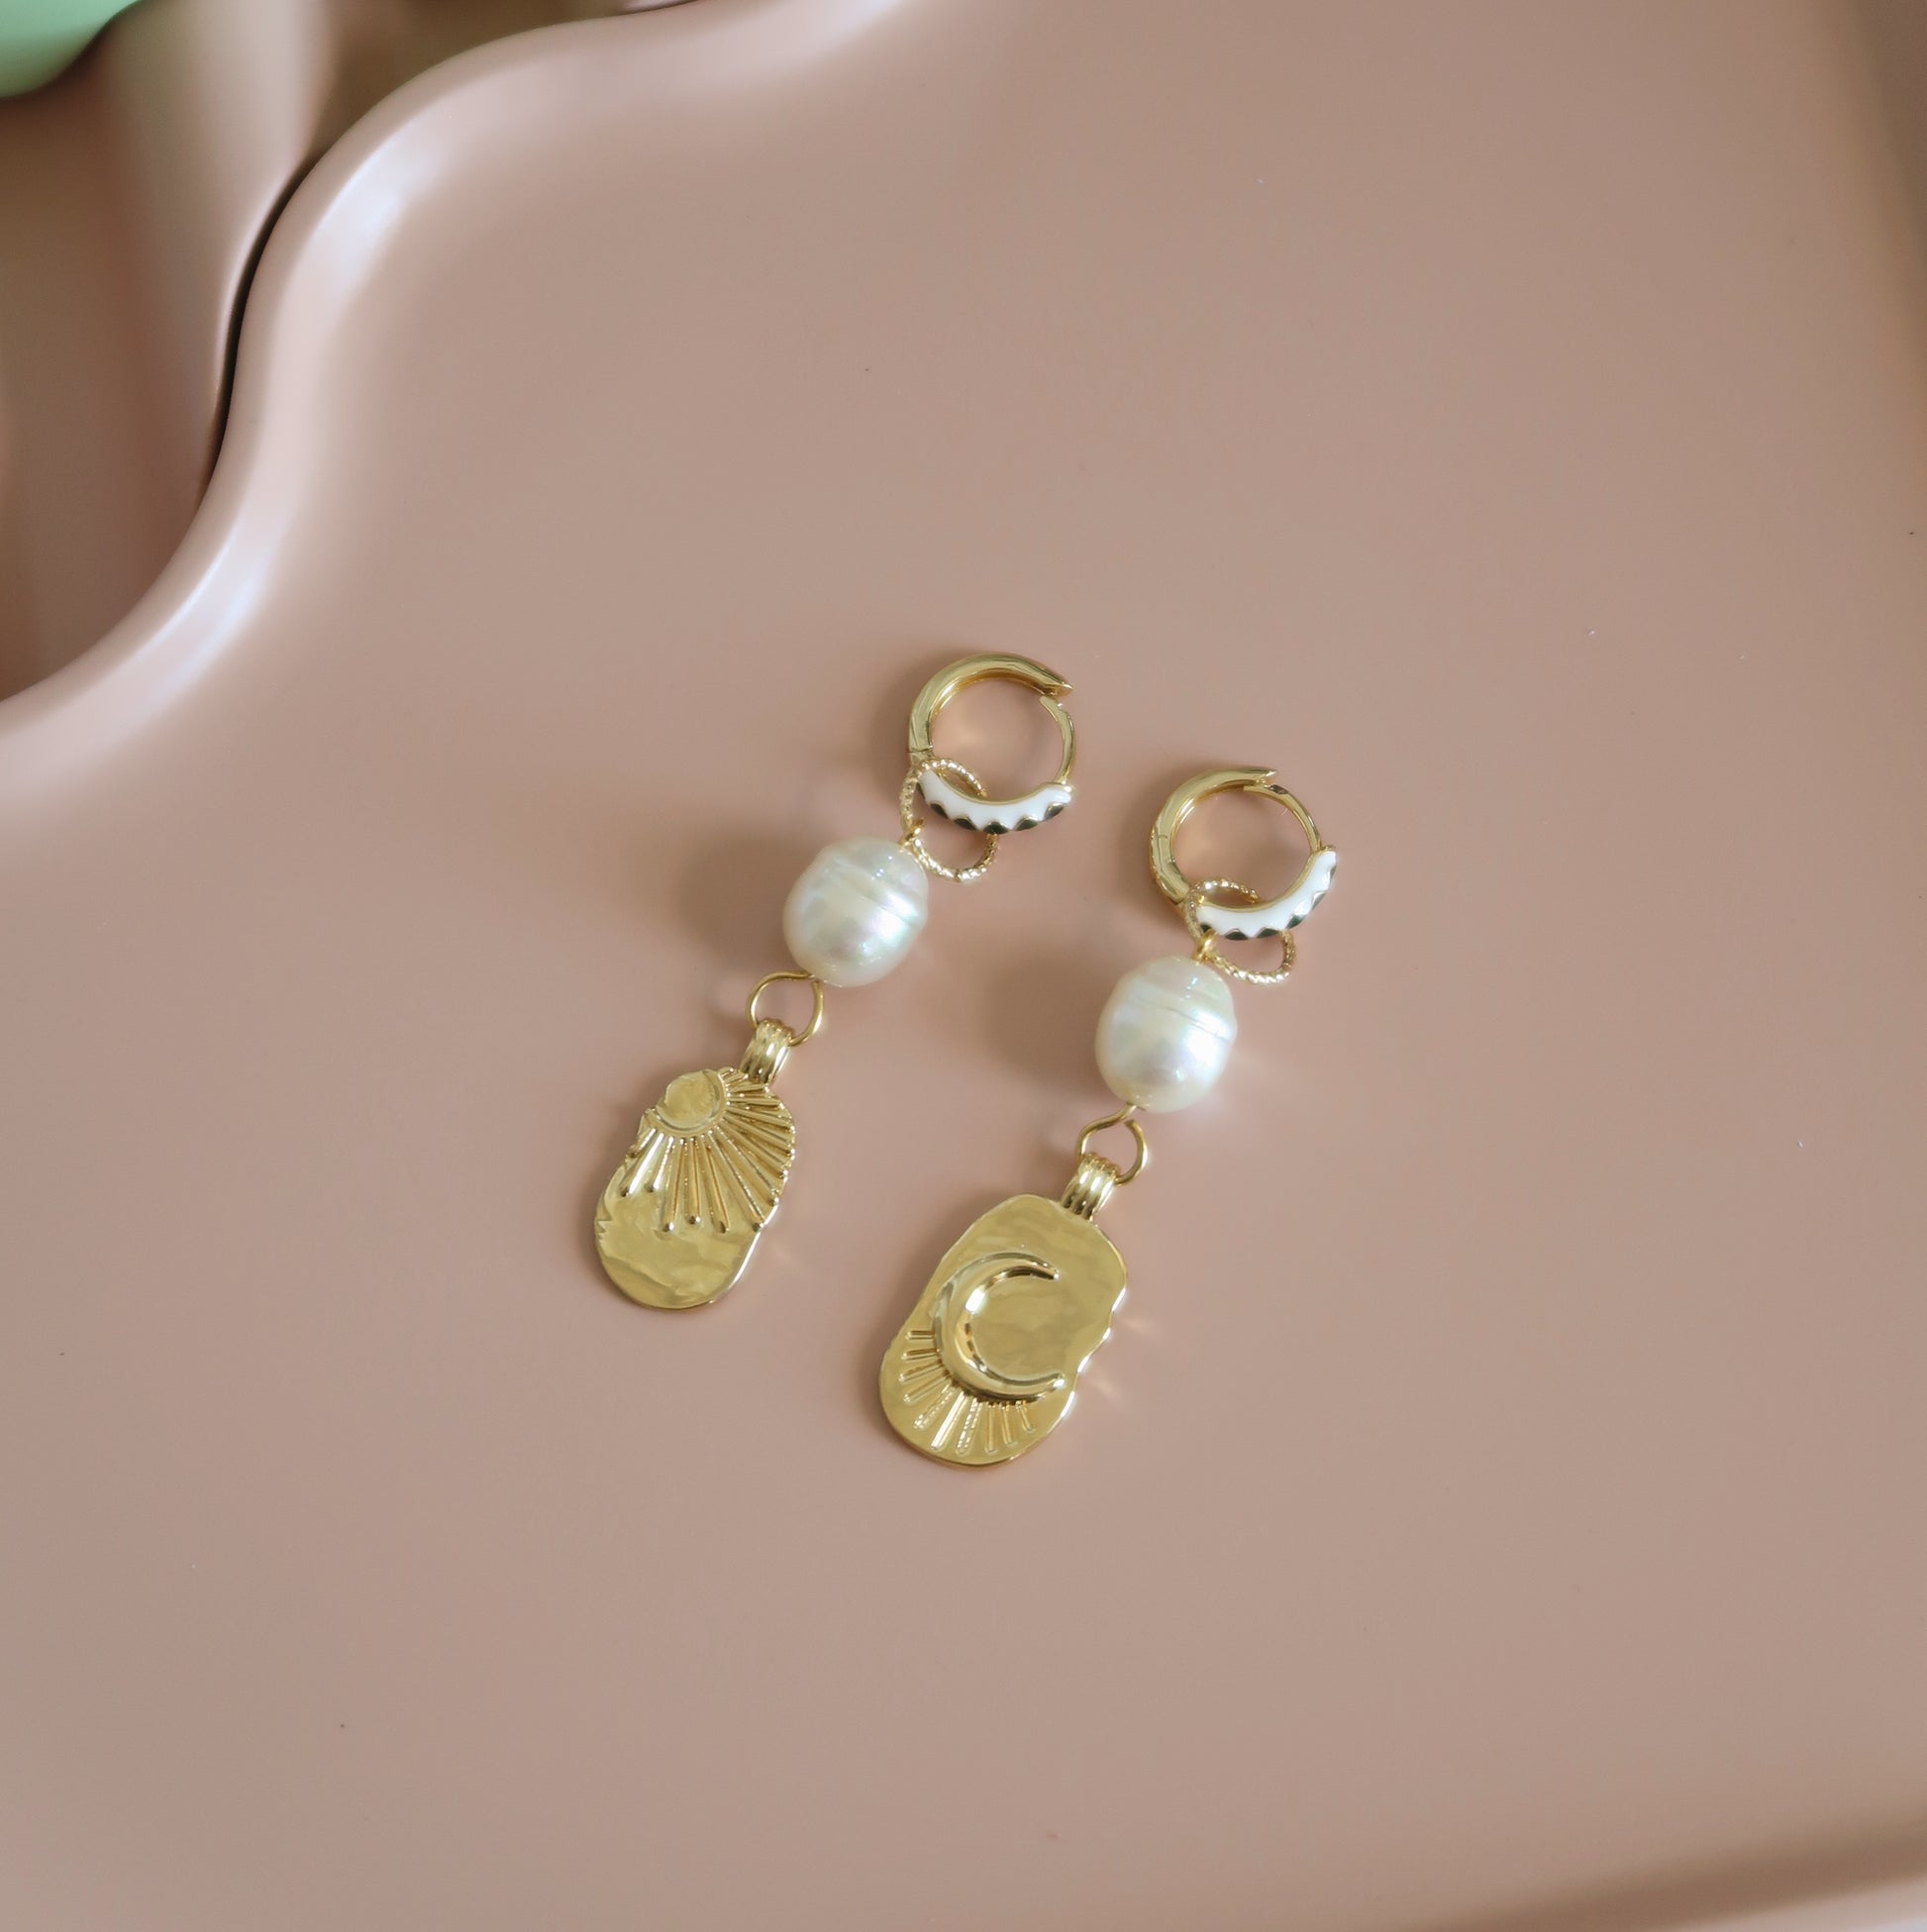 Gold hoop earrings with sun, moon and pearl charms 